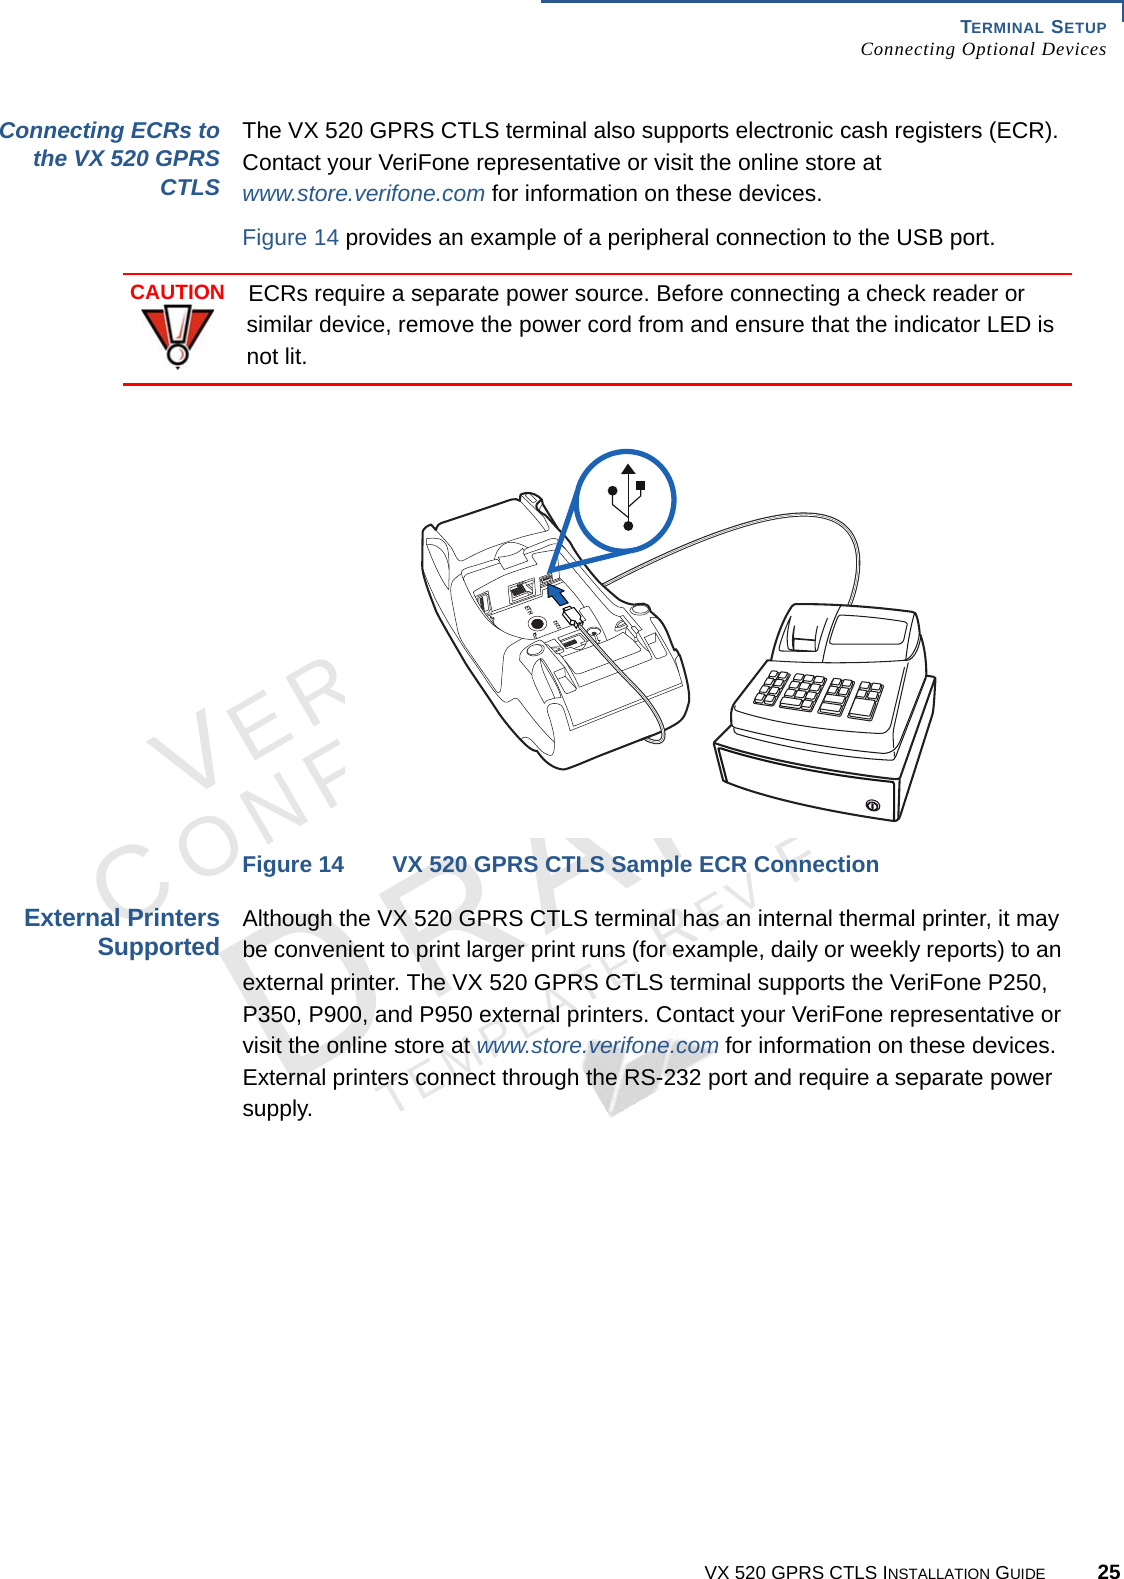 TERMINAL SETUPConnecting Optional DevicesVX 520 GPRS CTLS INSTALLATION GUIDE 25VERIFONECONFIDENTIALTEMPLATE REV F Connecting ECRs tothe VX 520 GPRSCTLSThe VX 520 GPRS CTLS terminal also supports electronic cash registers (ECR). Contact your VeriFone representative or visit the online store at www.store.verifone.com for information on these devices. Figure 14 provides an example of a peripheral connection to the USB port. Figure 14 VX 520 GPRS CTLS Sample ECR ConnectionExternal PrintersSupportedAlthough the VX 520 GPRS CTLS terminal has an internal thermal printer, it may be convenient to print larger print runs (for example, daily or weekly reports) to an external printer. The VX 520 GPRS CTLS terminal supports the VeriFone P250, P350, P900, and P950 external printers. Contact your VeriFone representative or visit the online store at www.store.verifone.com for information on these devices. External printers connect through the RS-232 port and require a separate power supply.CAUTIONECRs require a separate power source. Before connecting a check reader or similar device, remove the power cord from and ensure that the indicator LED is not lit.3%4(